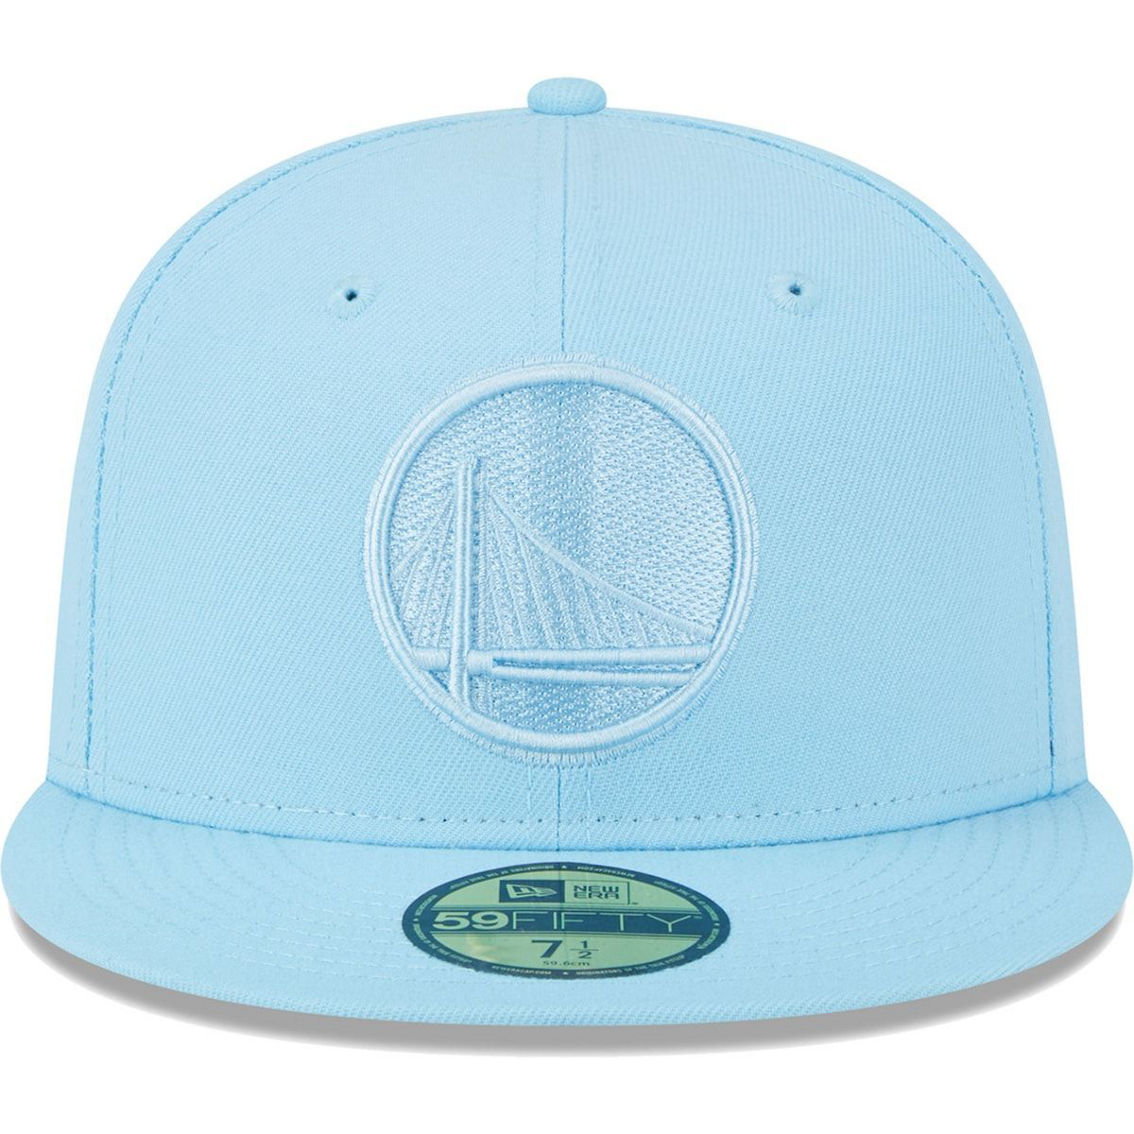 New Era Men's Powder Blue Golden State Warriors Spring Color Pack 59FIFTY Fitted Hat - Image 3 of 4